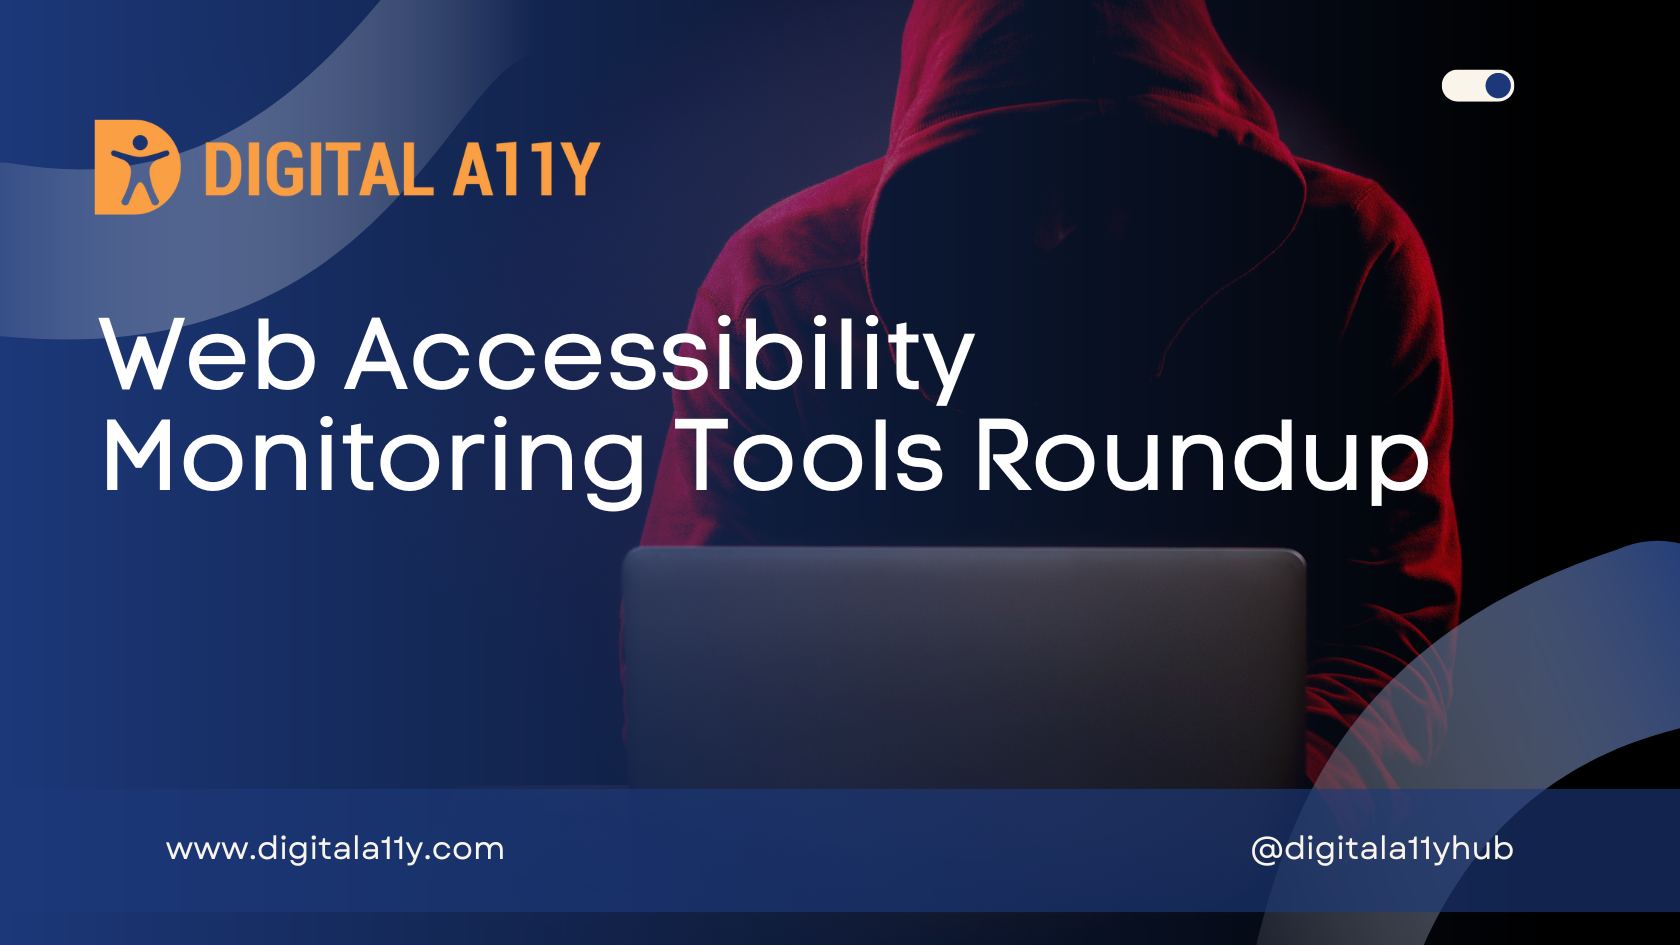 Web Accessibility Monitoring Tools Roundup